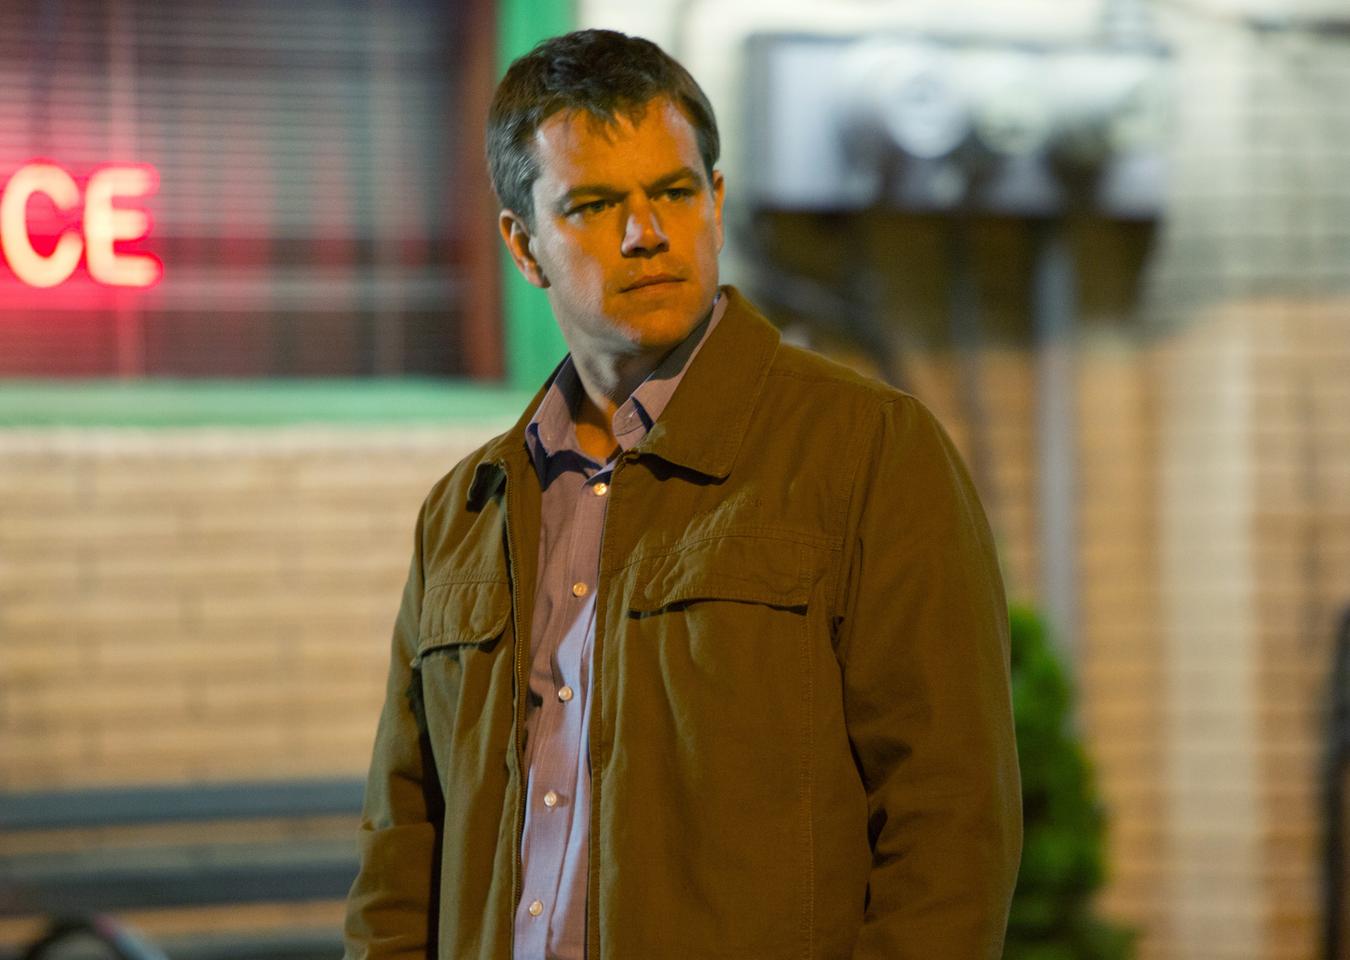 Promised Land,' With Matt Damon, Directed by Gus Van Sant - The